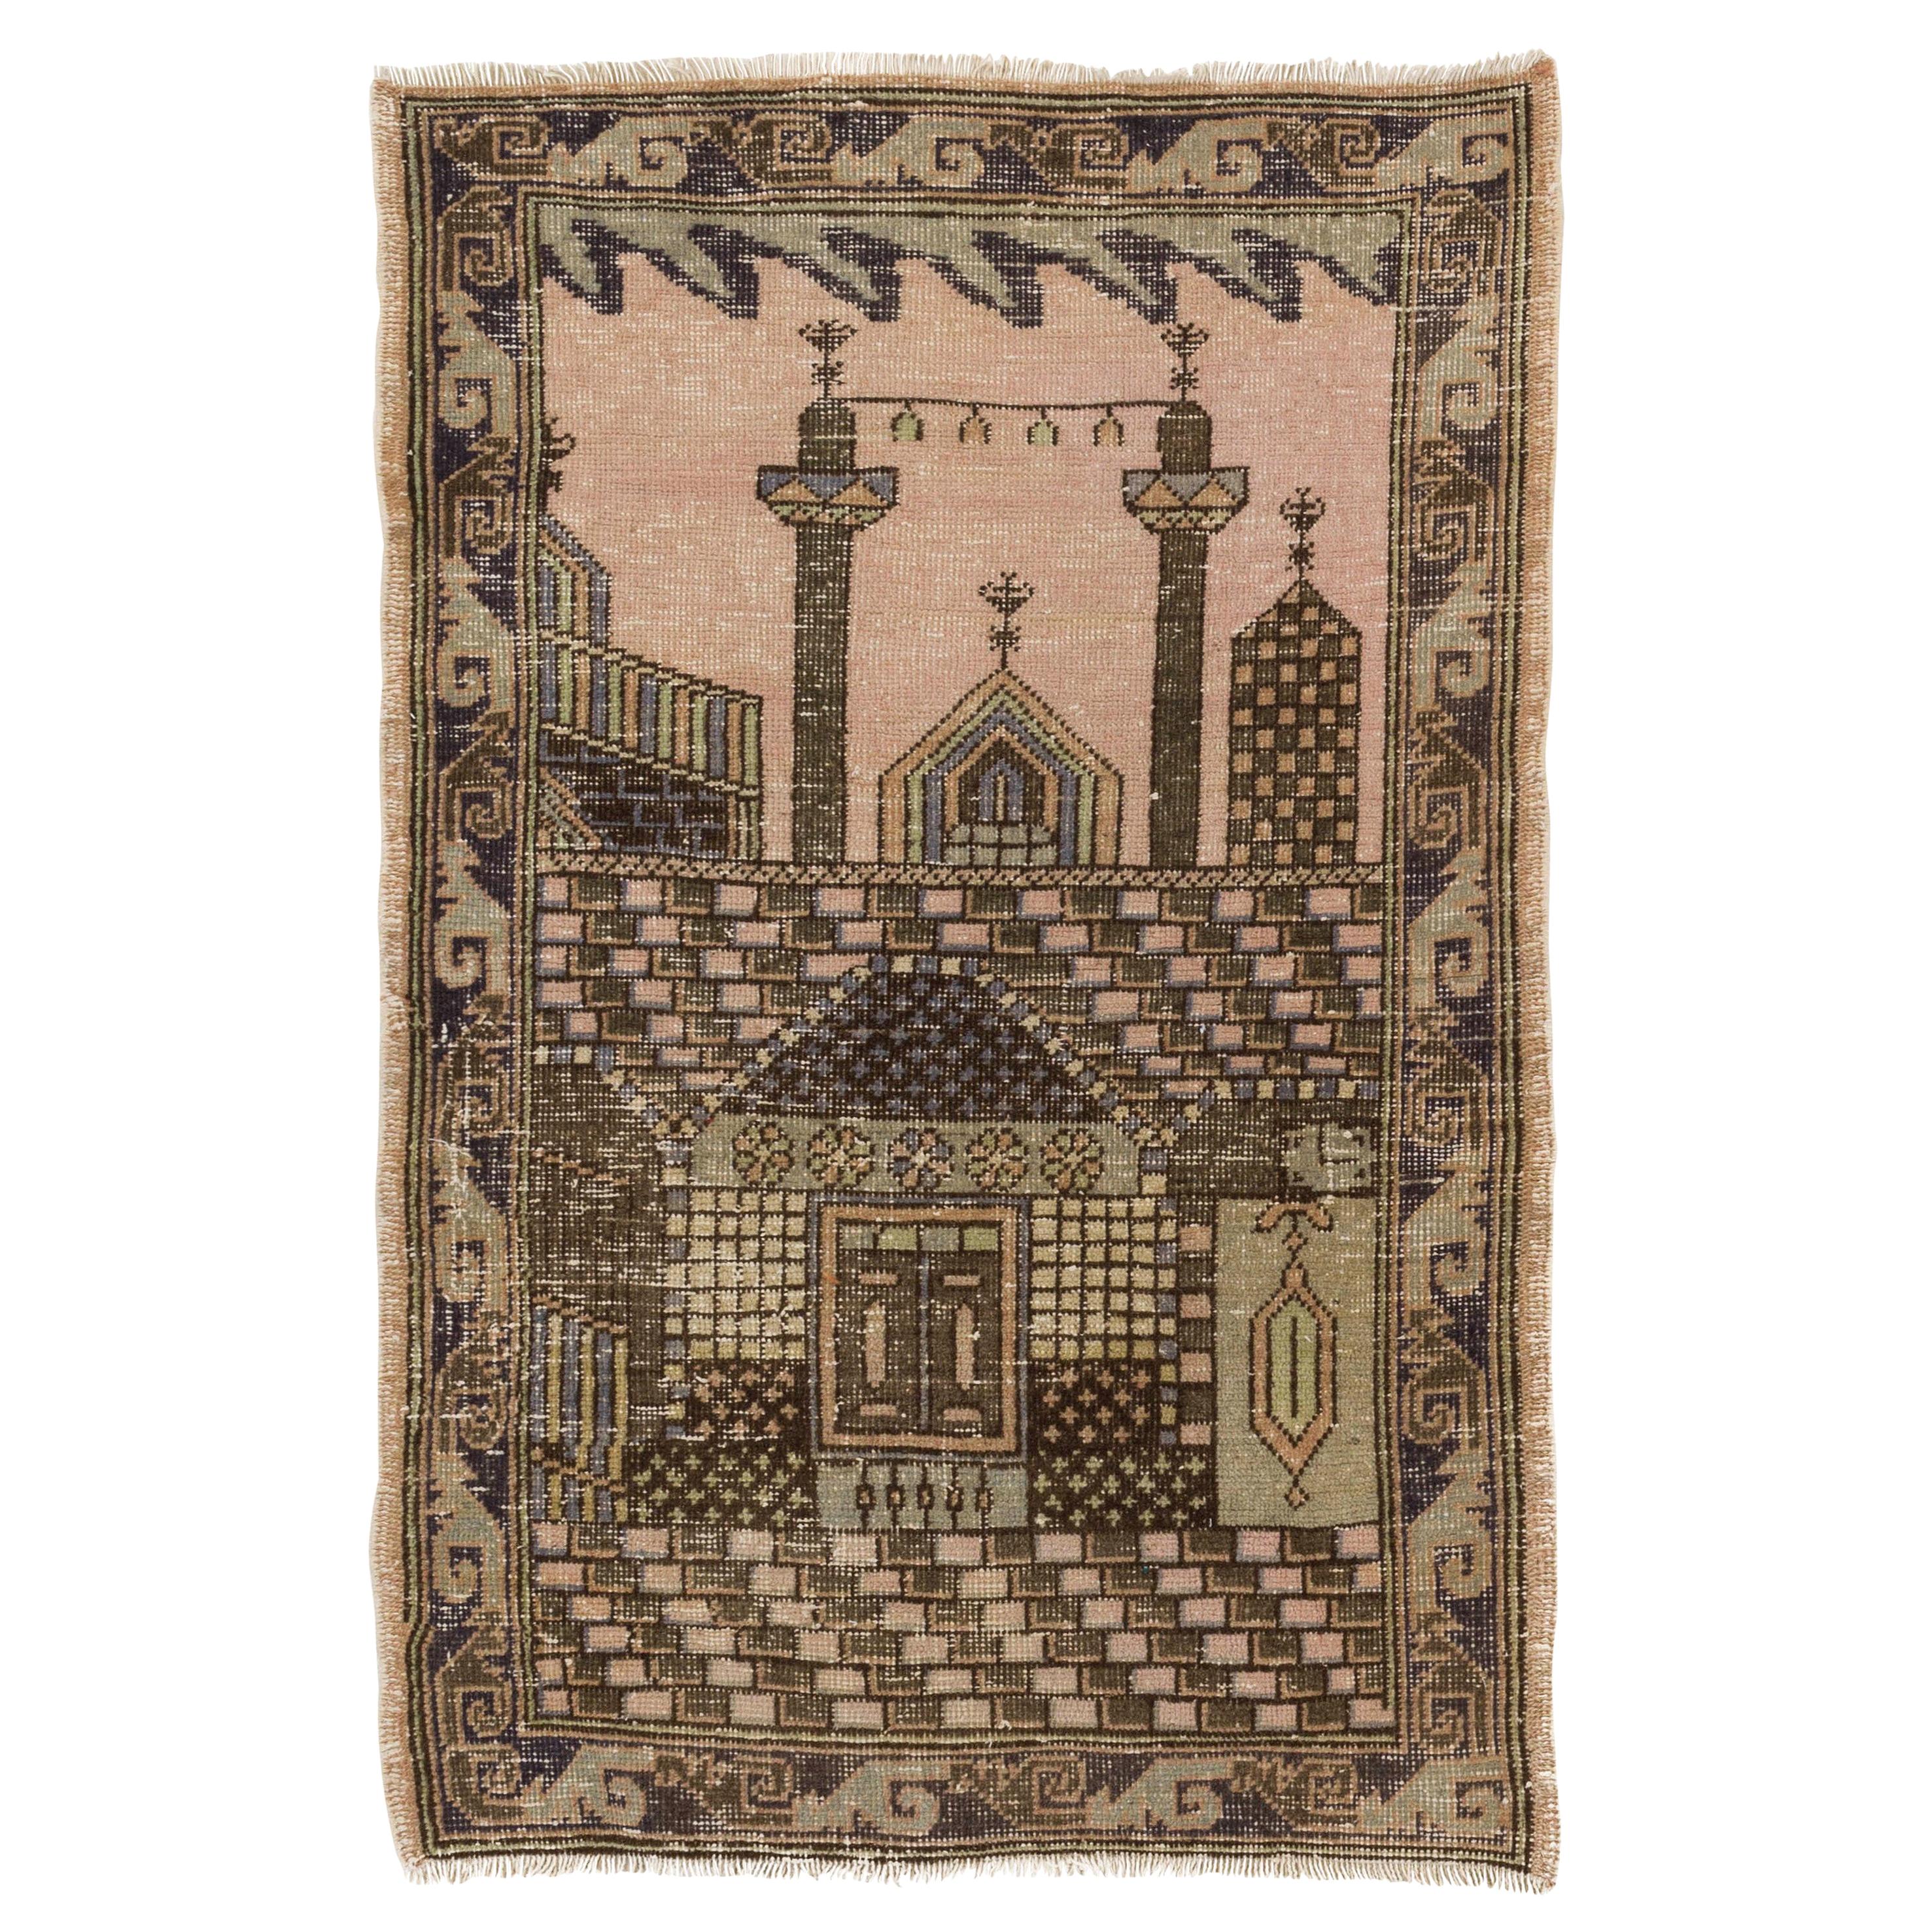 2.7x4 Ft Vintage One-of-a-Kind Anatolian Pictorial Prayer Rug Depicting a Mosque